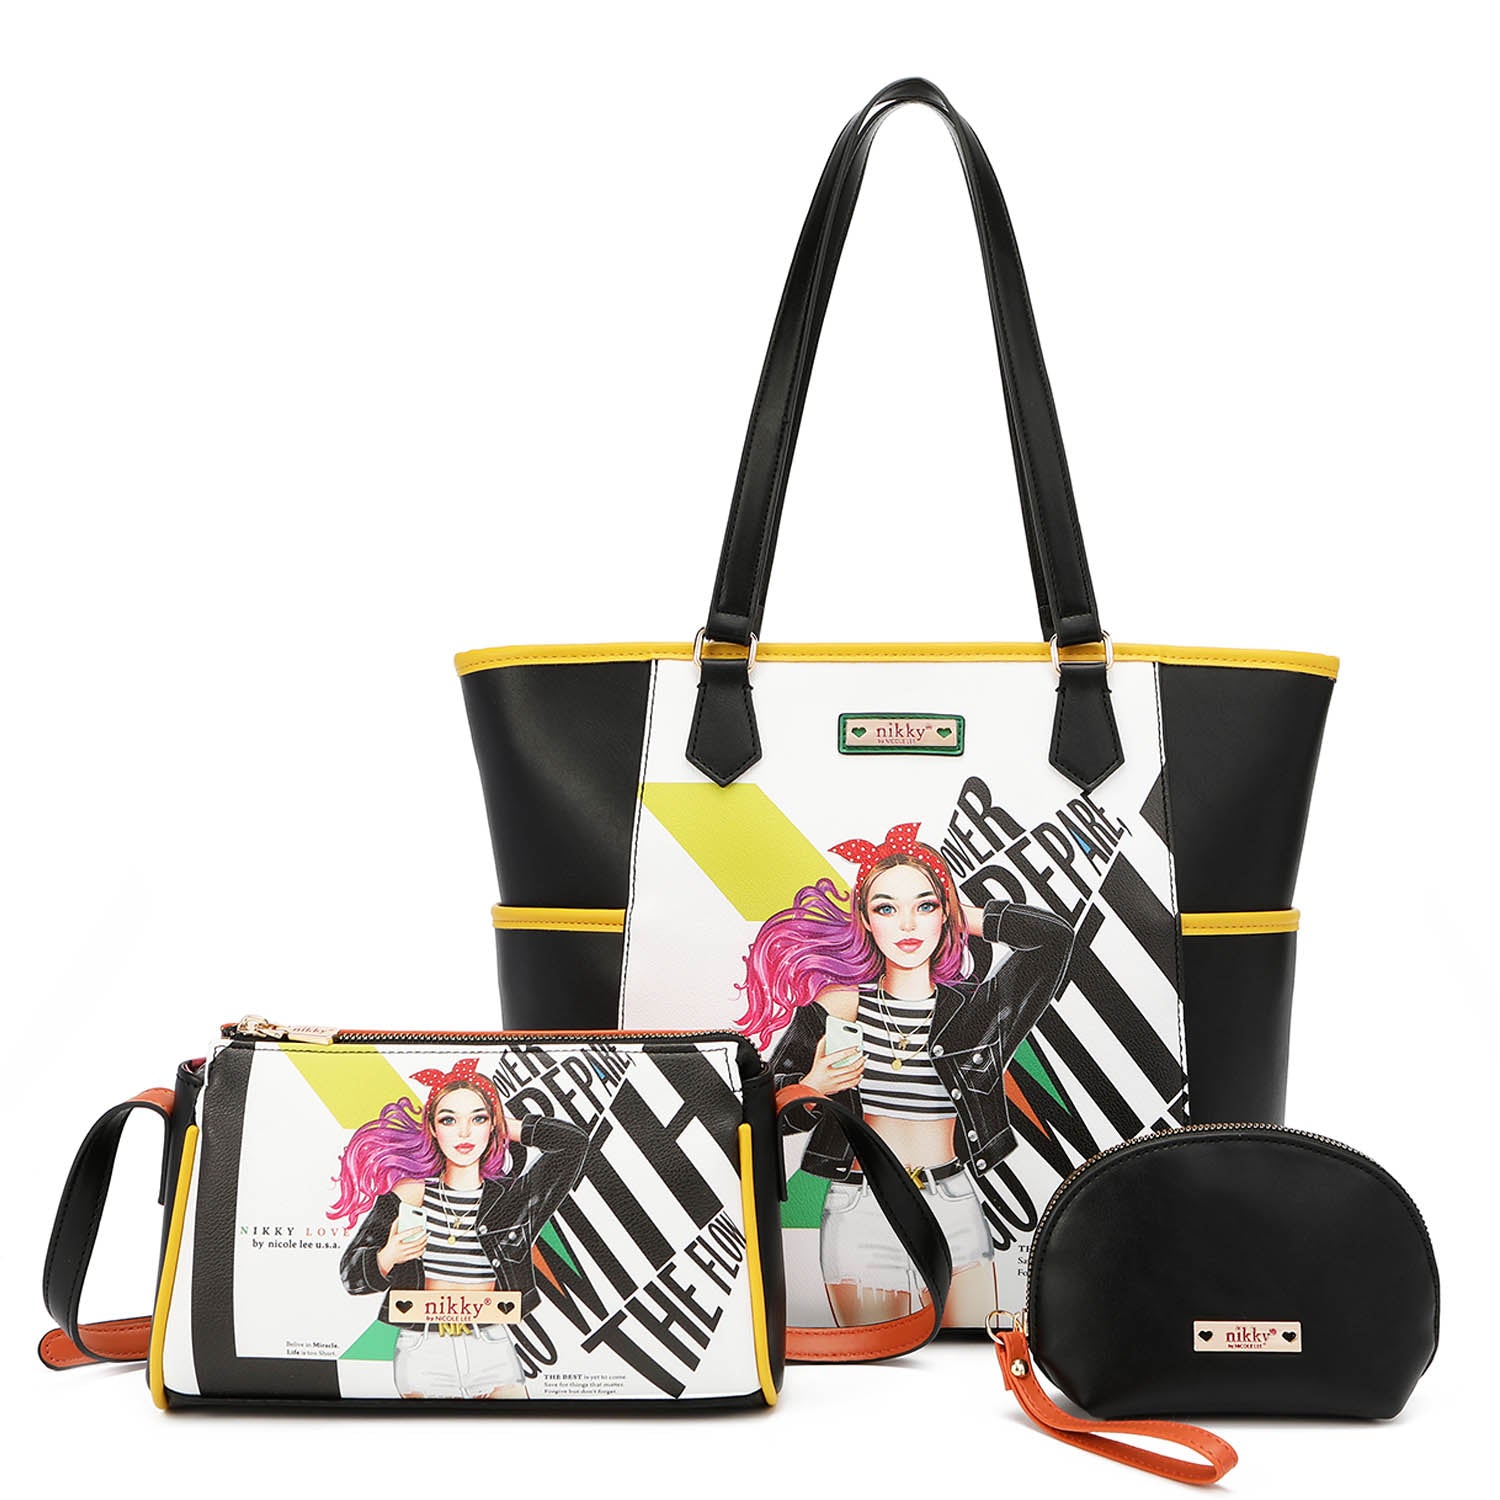 COLLEGE GIRL 3 PIECE SET (TOTE, CROSSBODY, POUCH)